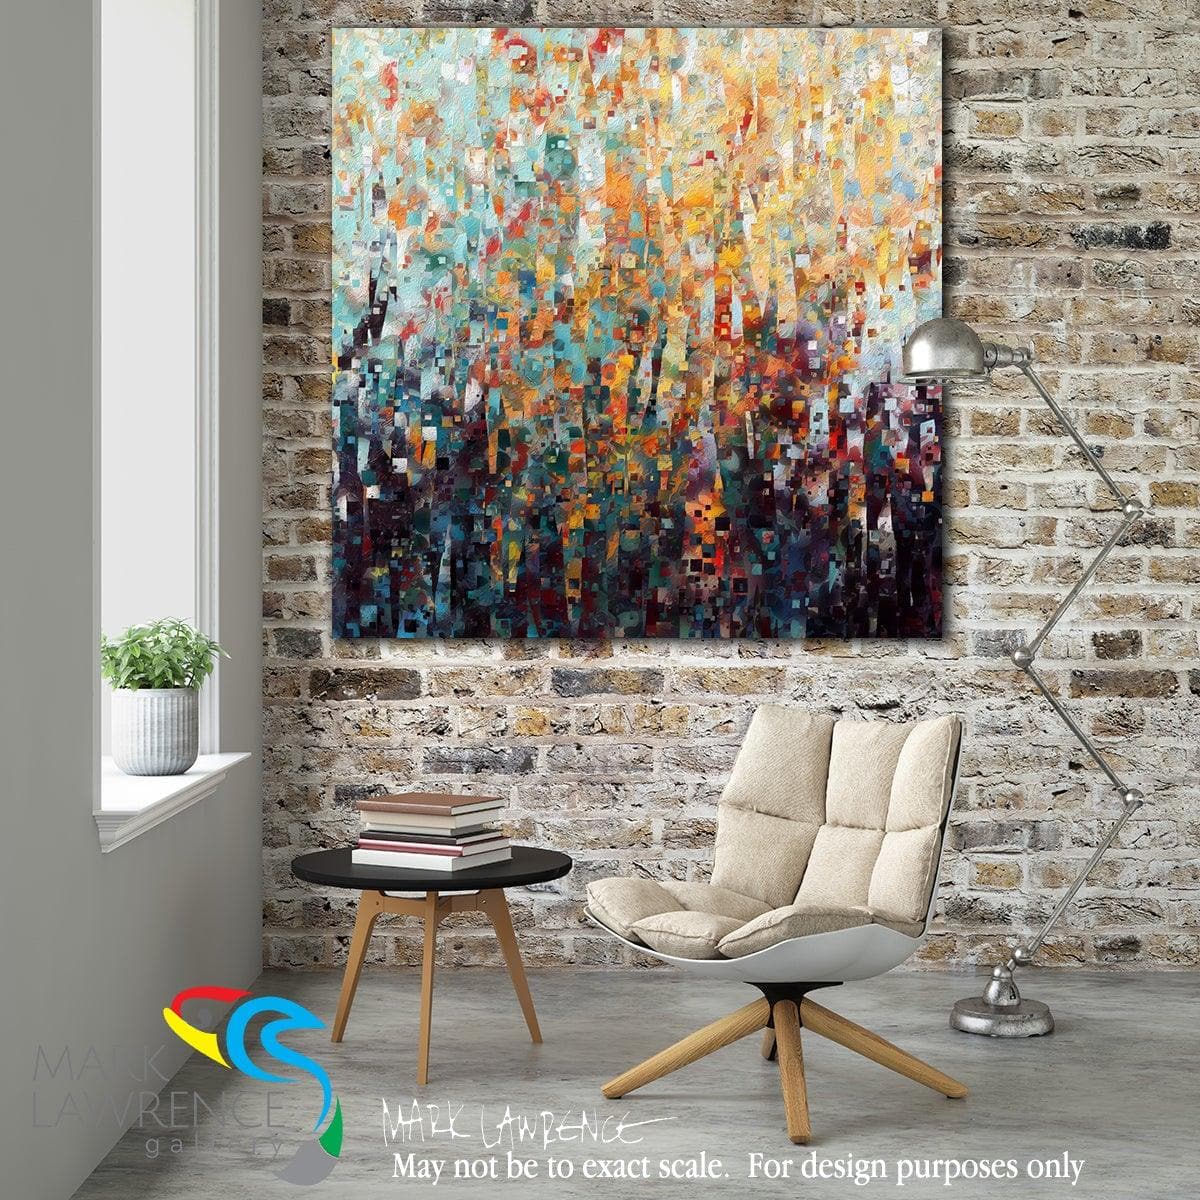 Interior Design Inspiration. John 15:12. Love One Another. Limited Edition Christian Modern Art. Ultra-hand embellished and textured with rich brush strokes by the artist. Signed & numbered brightly colored Christian abstract art. Find Art That Speaks To You! This is My commandment, that you love one another as I have loved you. John 15:12